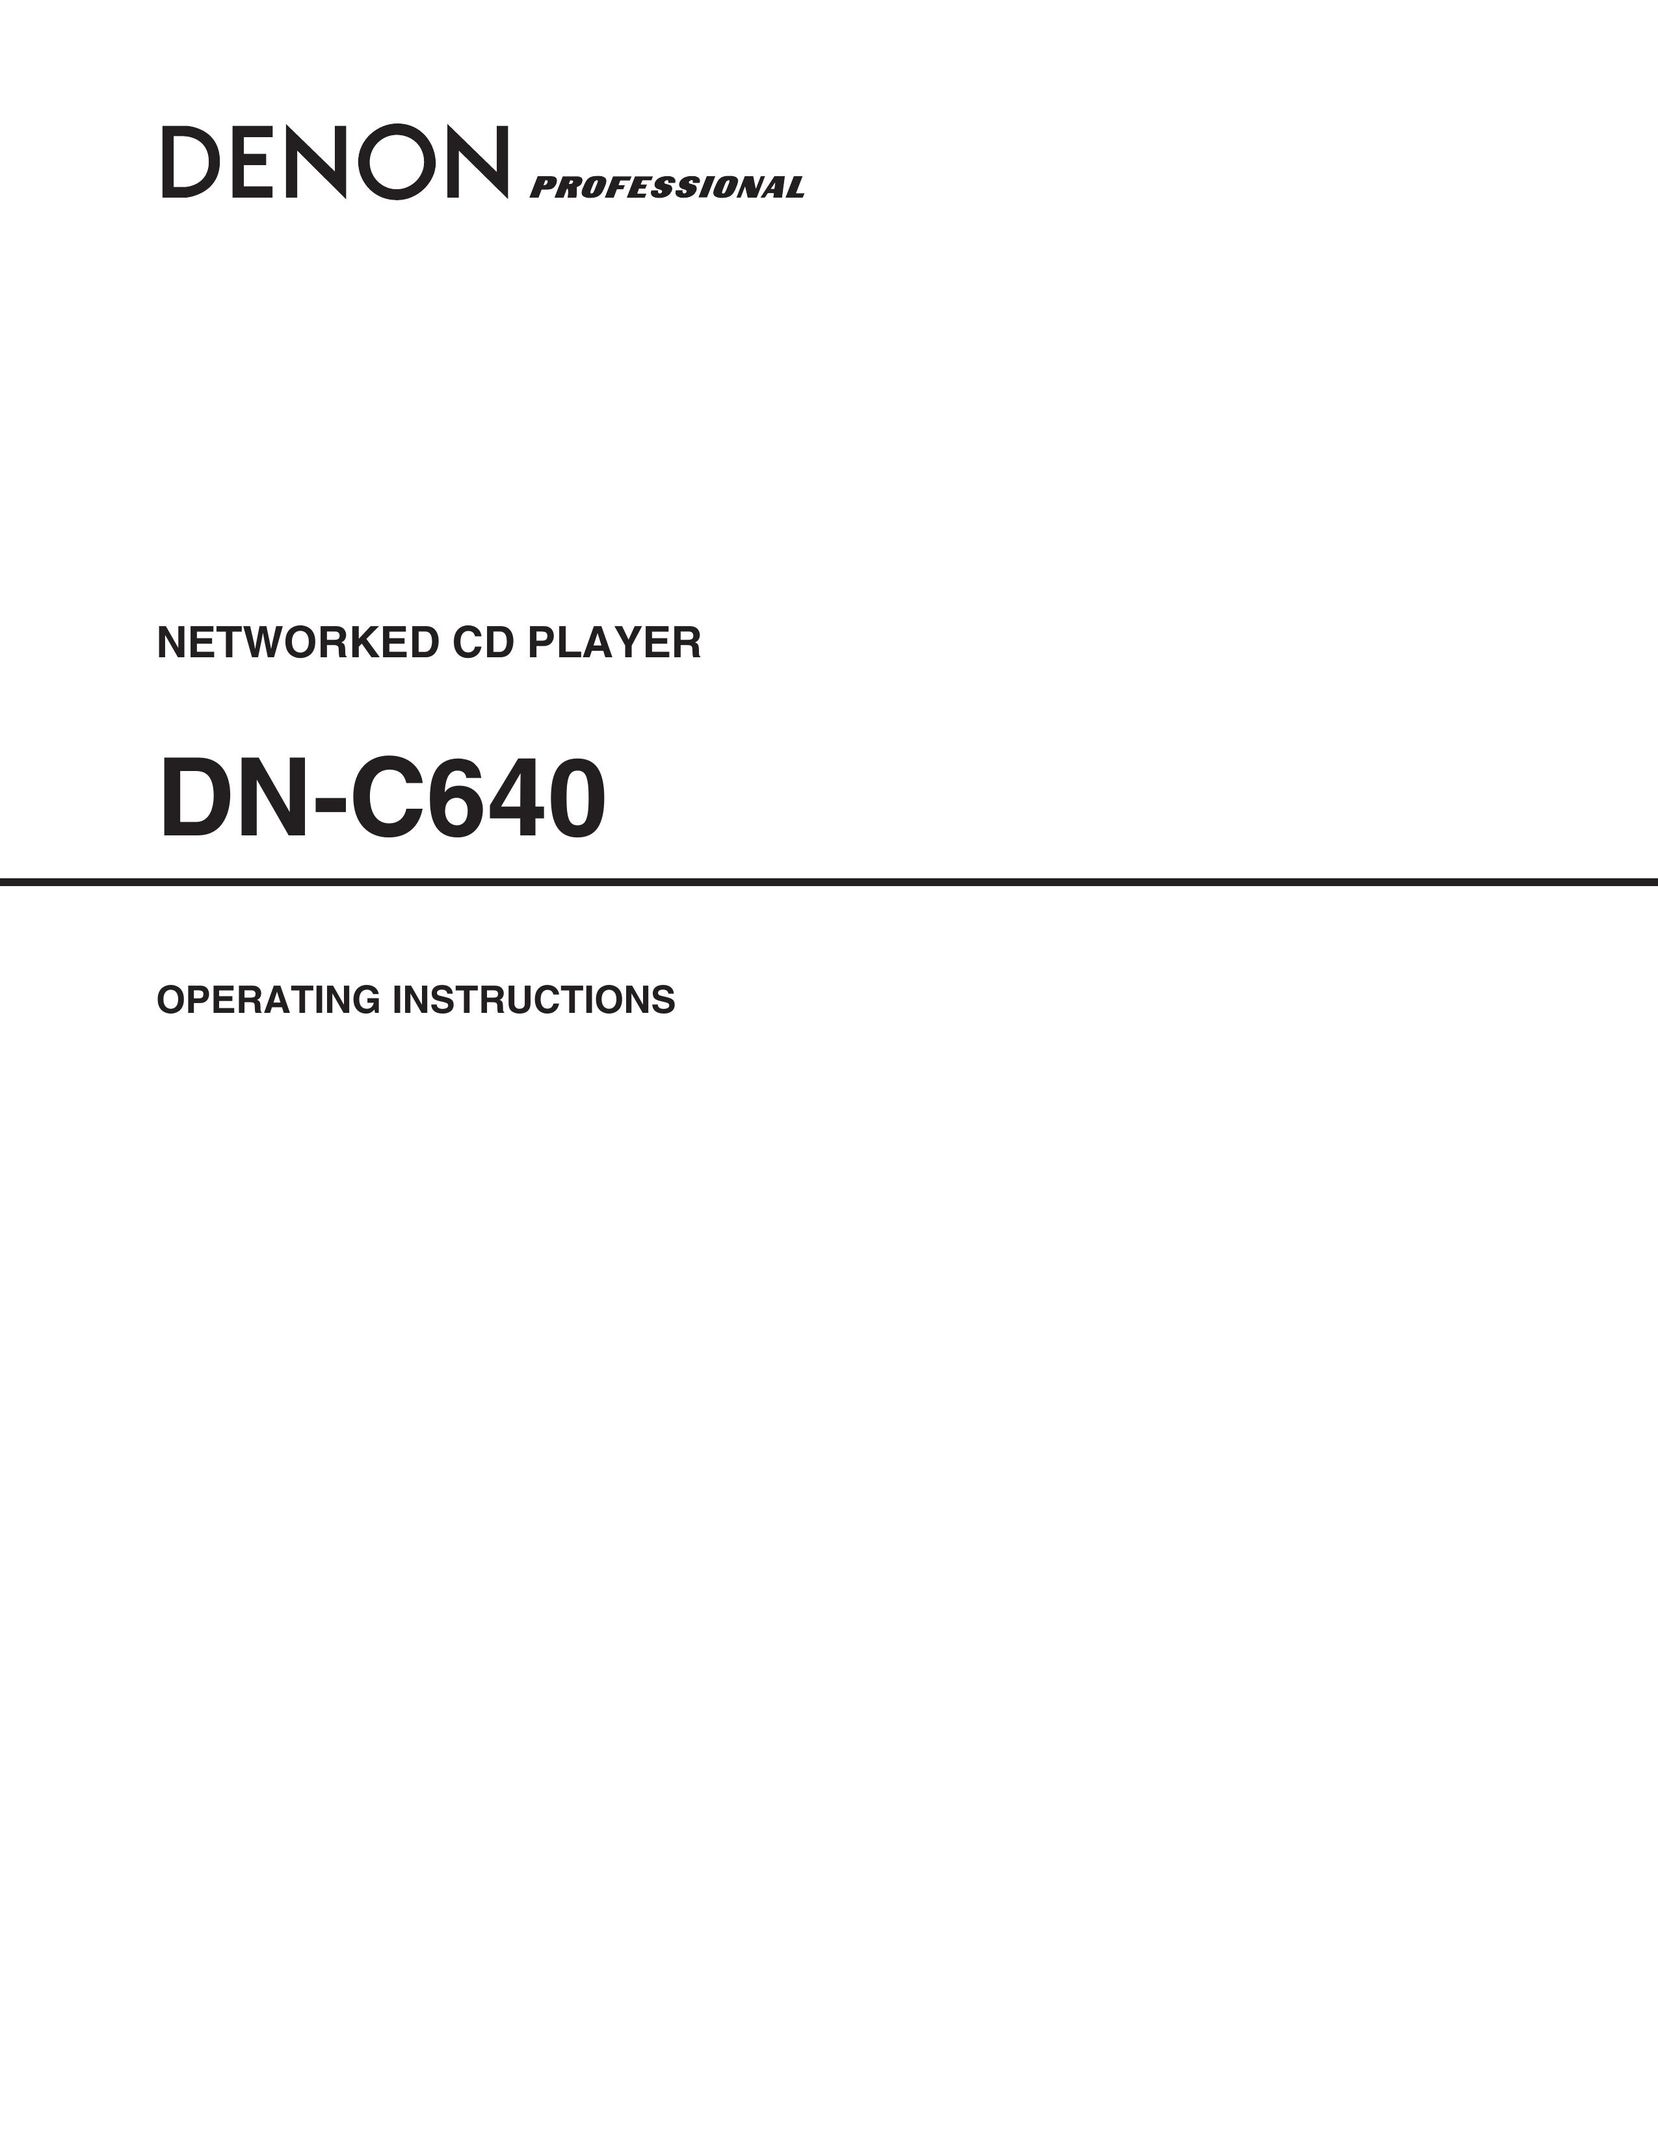 Dell DN-C640 CD Player User Manual